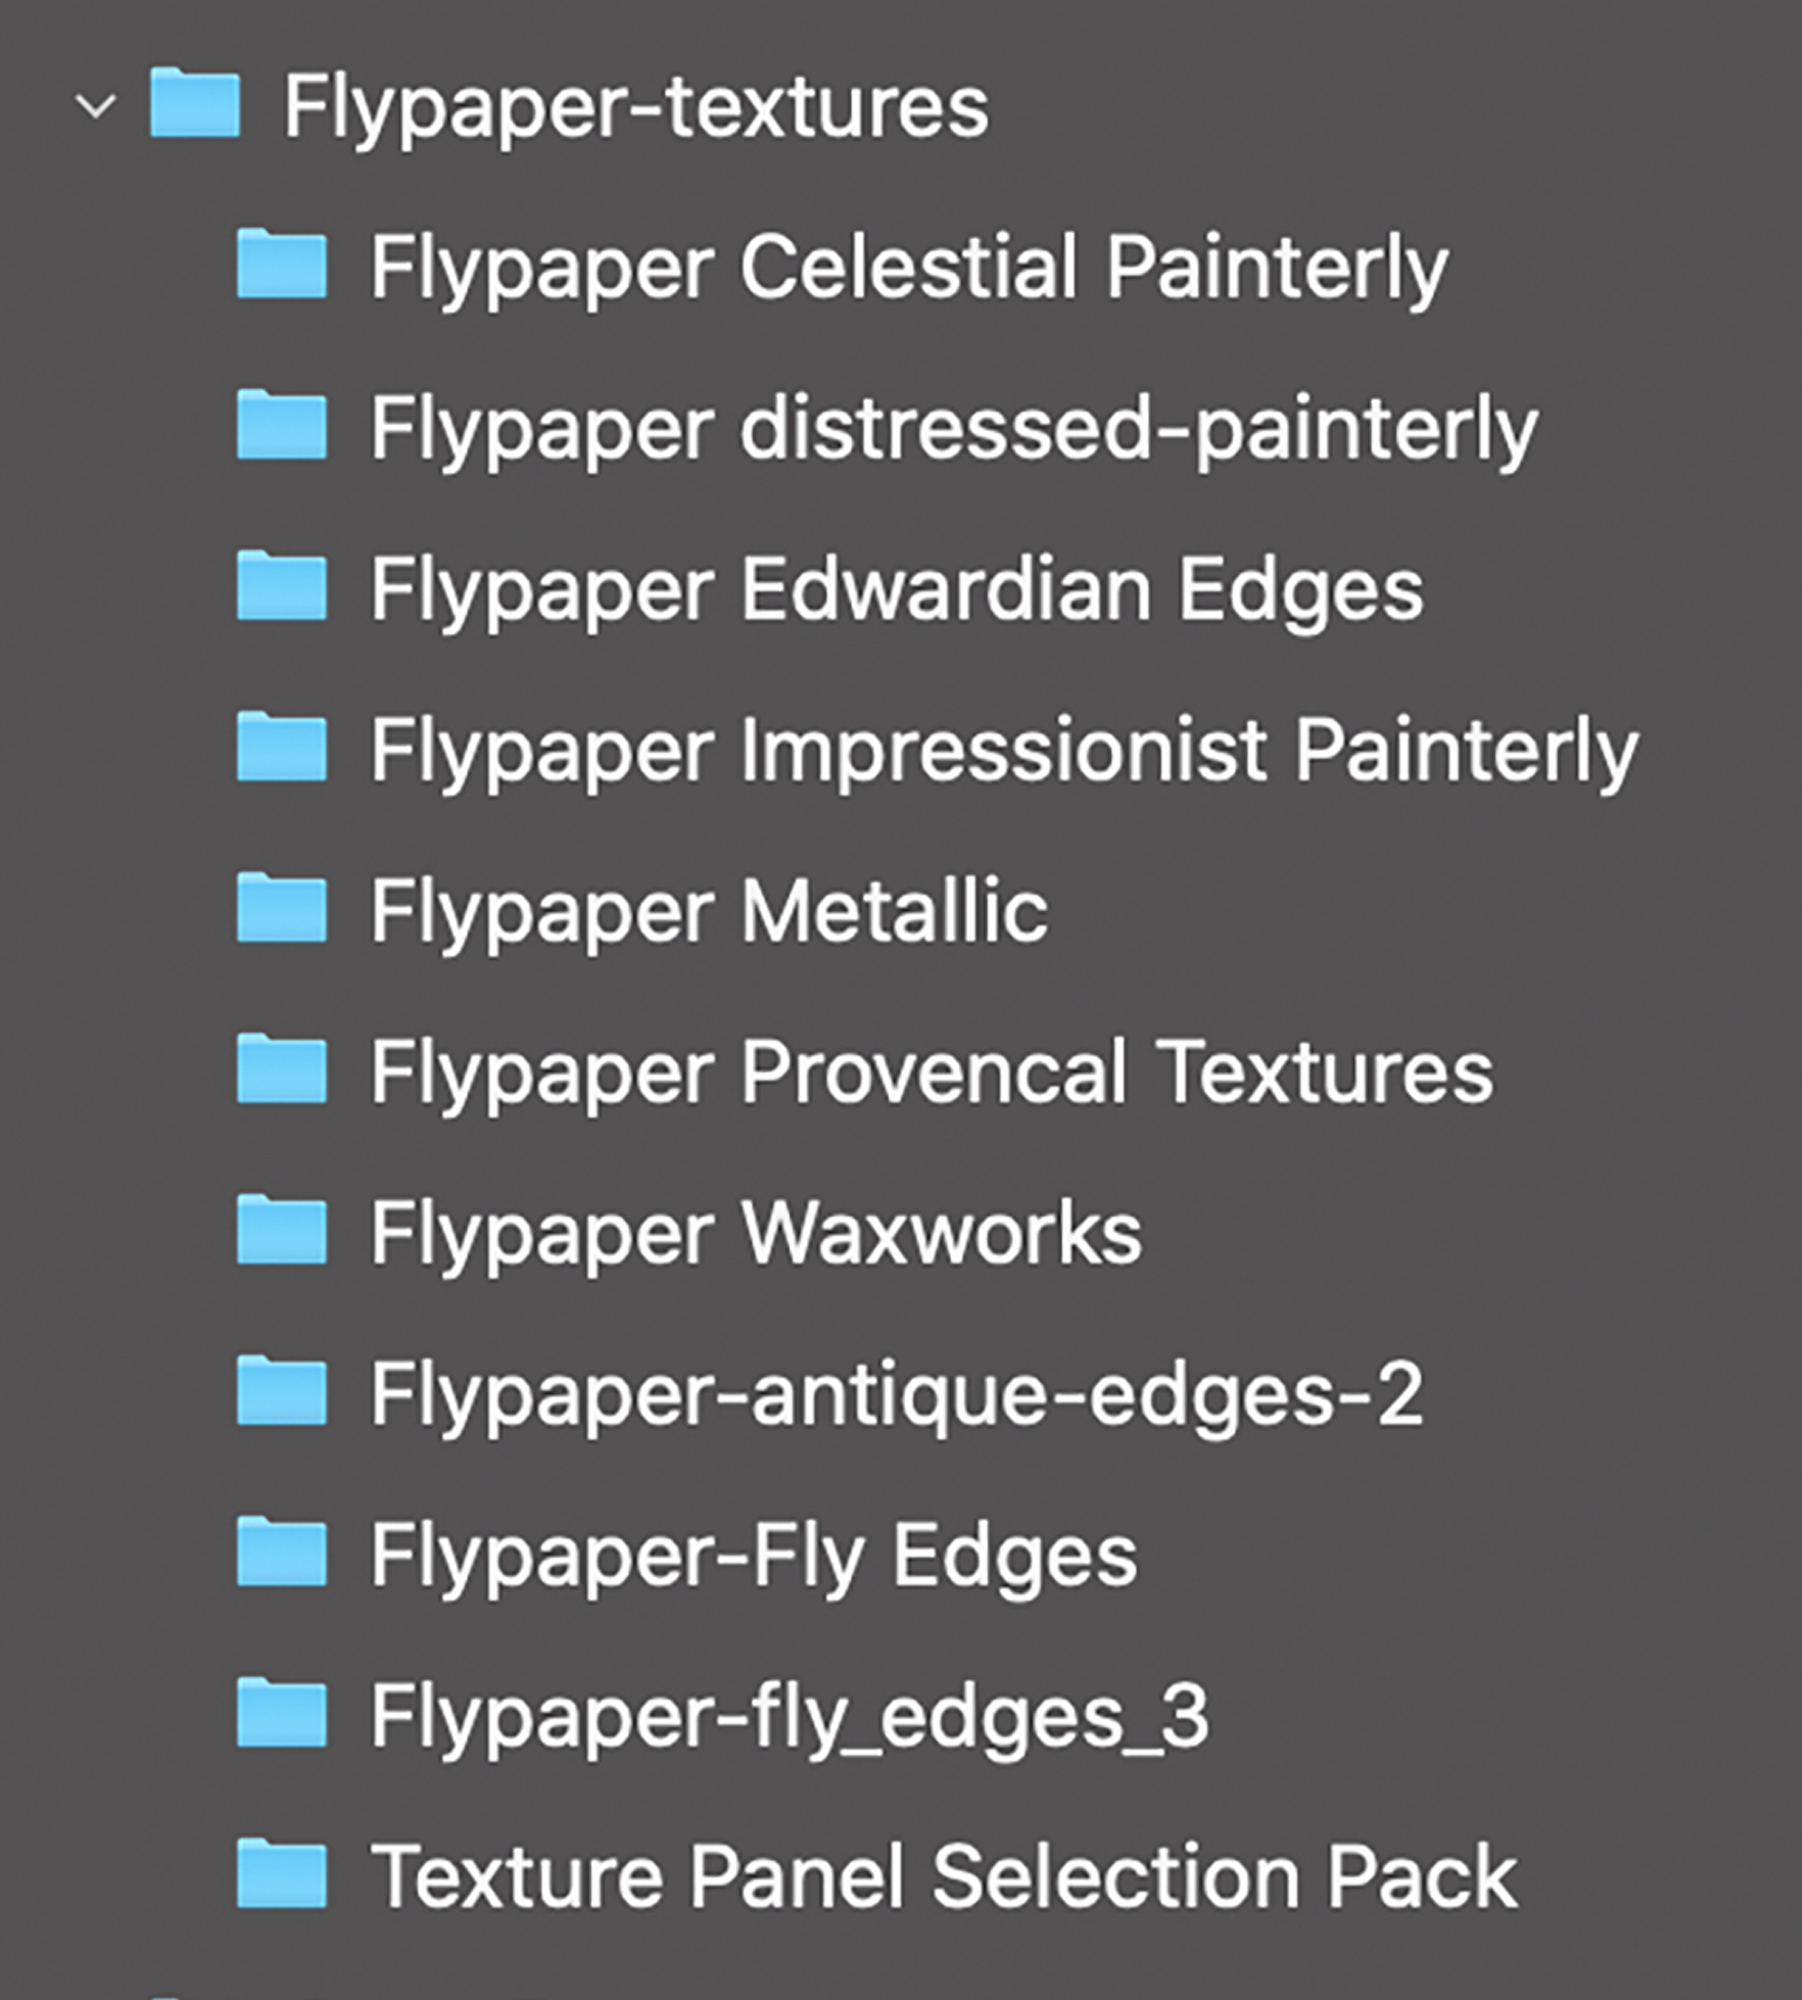 This shows the various collections I’ve bought from Flypaper stored in my Lightroom catalog. I find Lightroom really useful for organizing and previewing the textures.